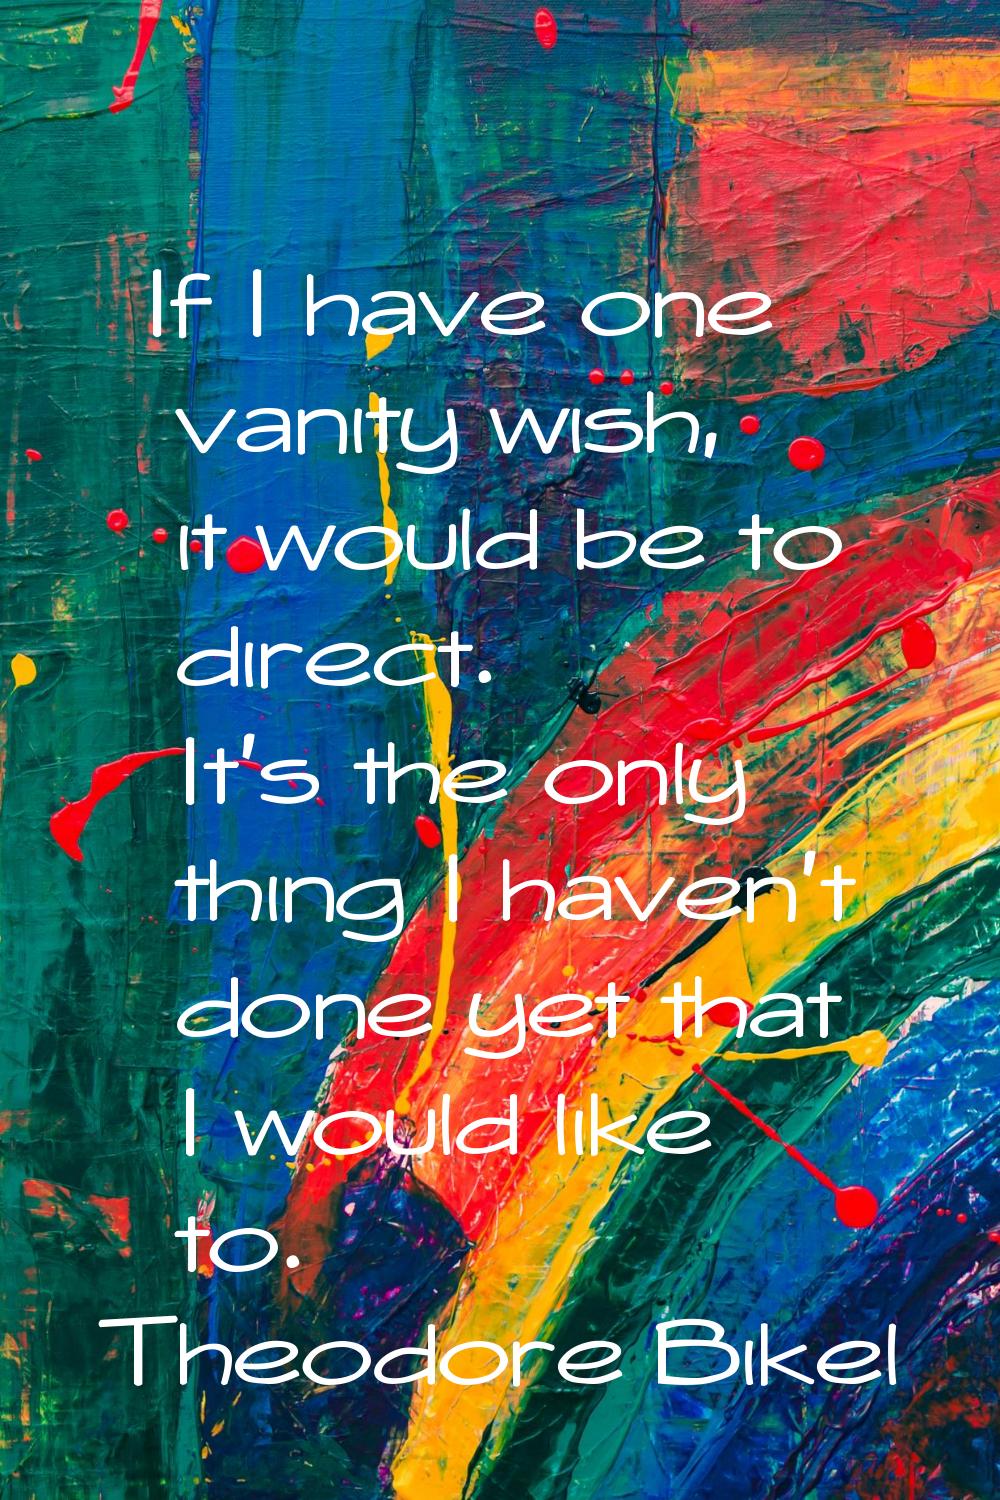 If I have one vanity wish, it would be to direct. It's the only thing I haven't done yet that I wou